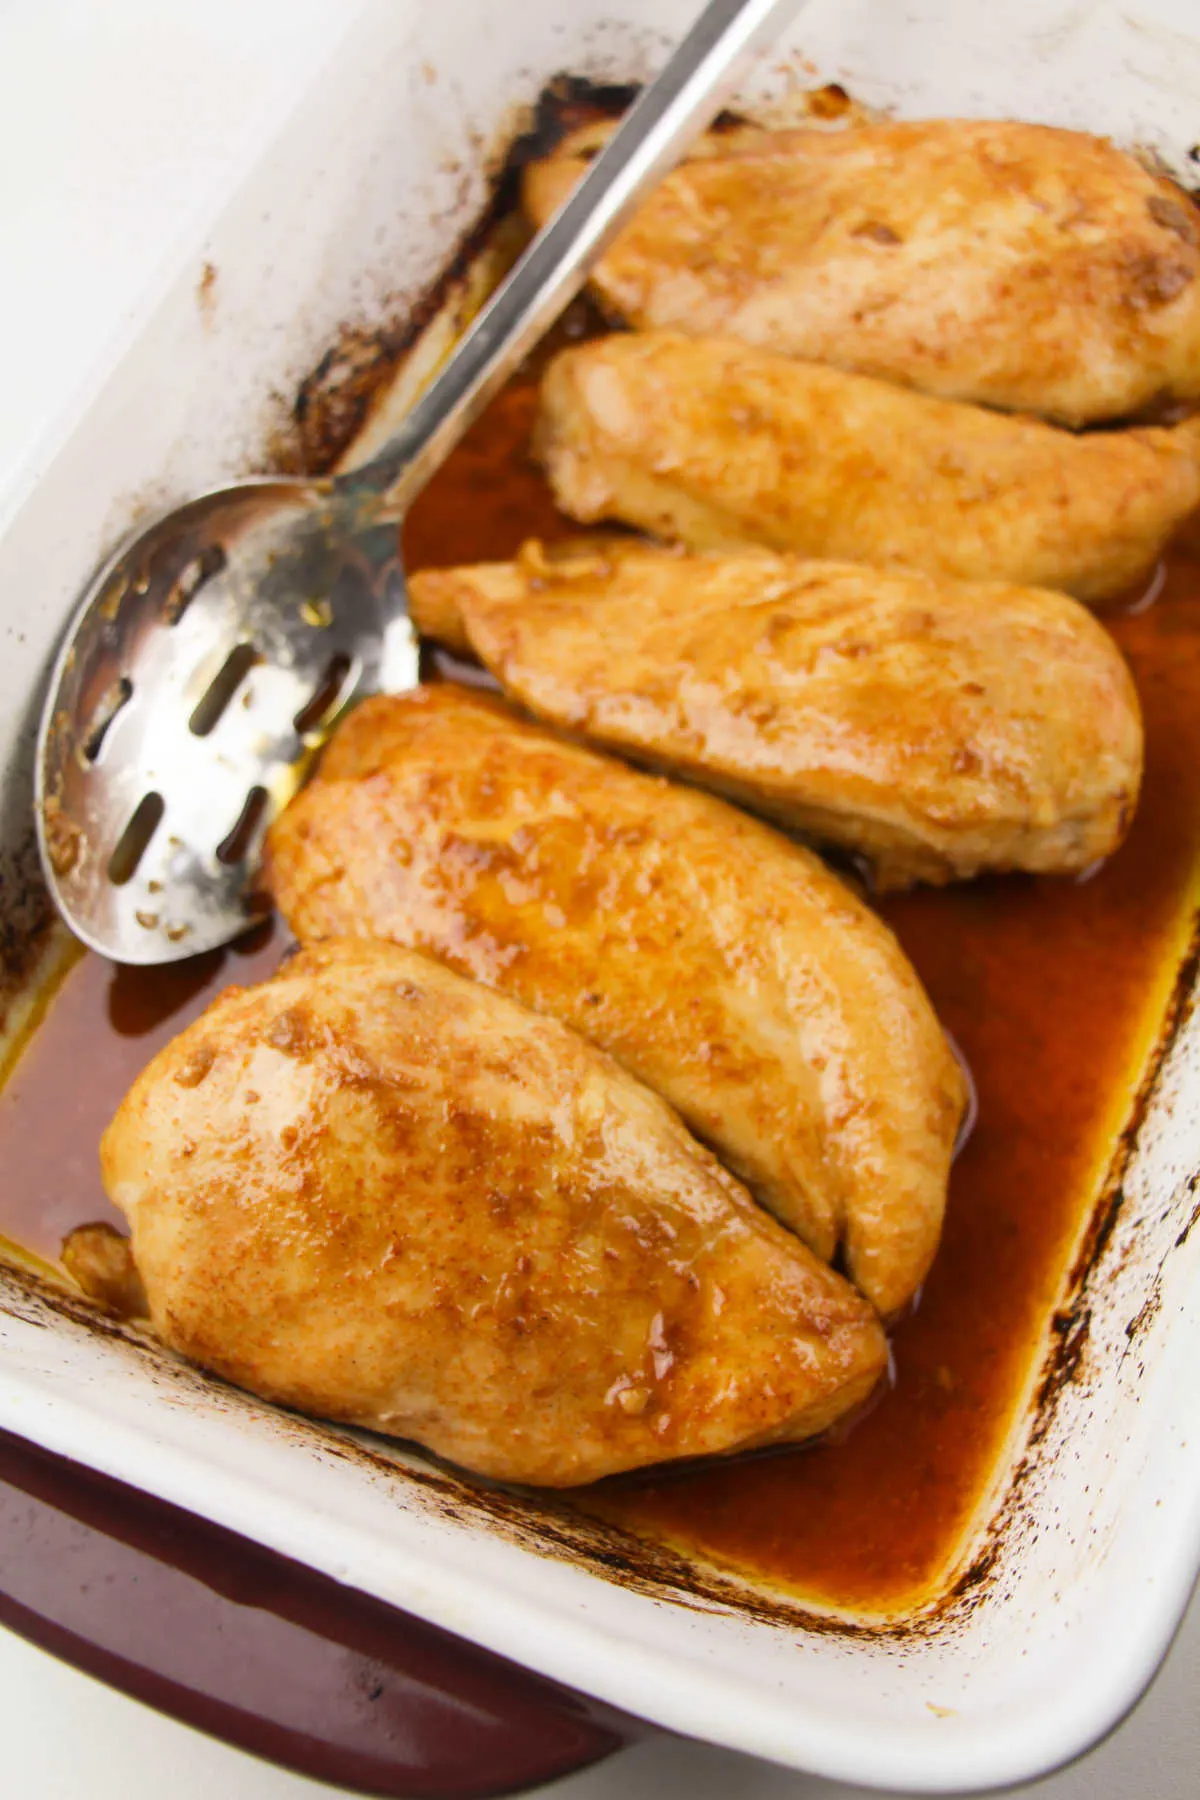 Pan of baked marinated chicken.